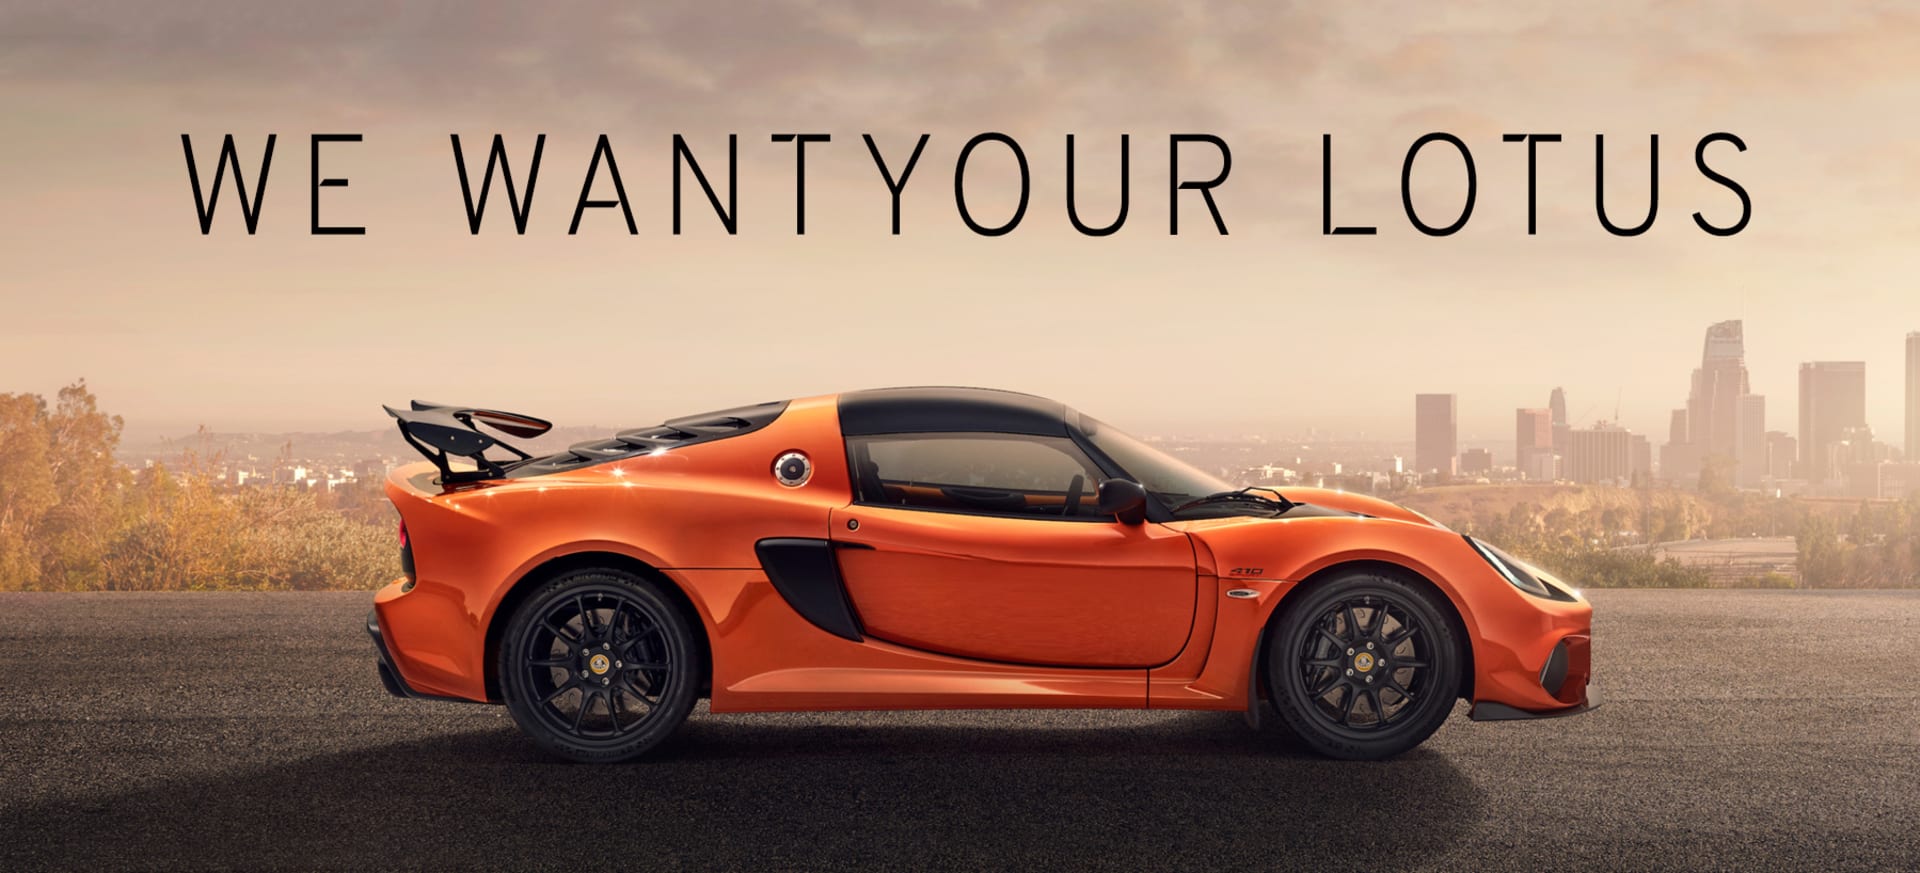 We Want Your Lotus